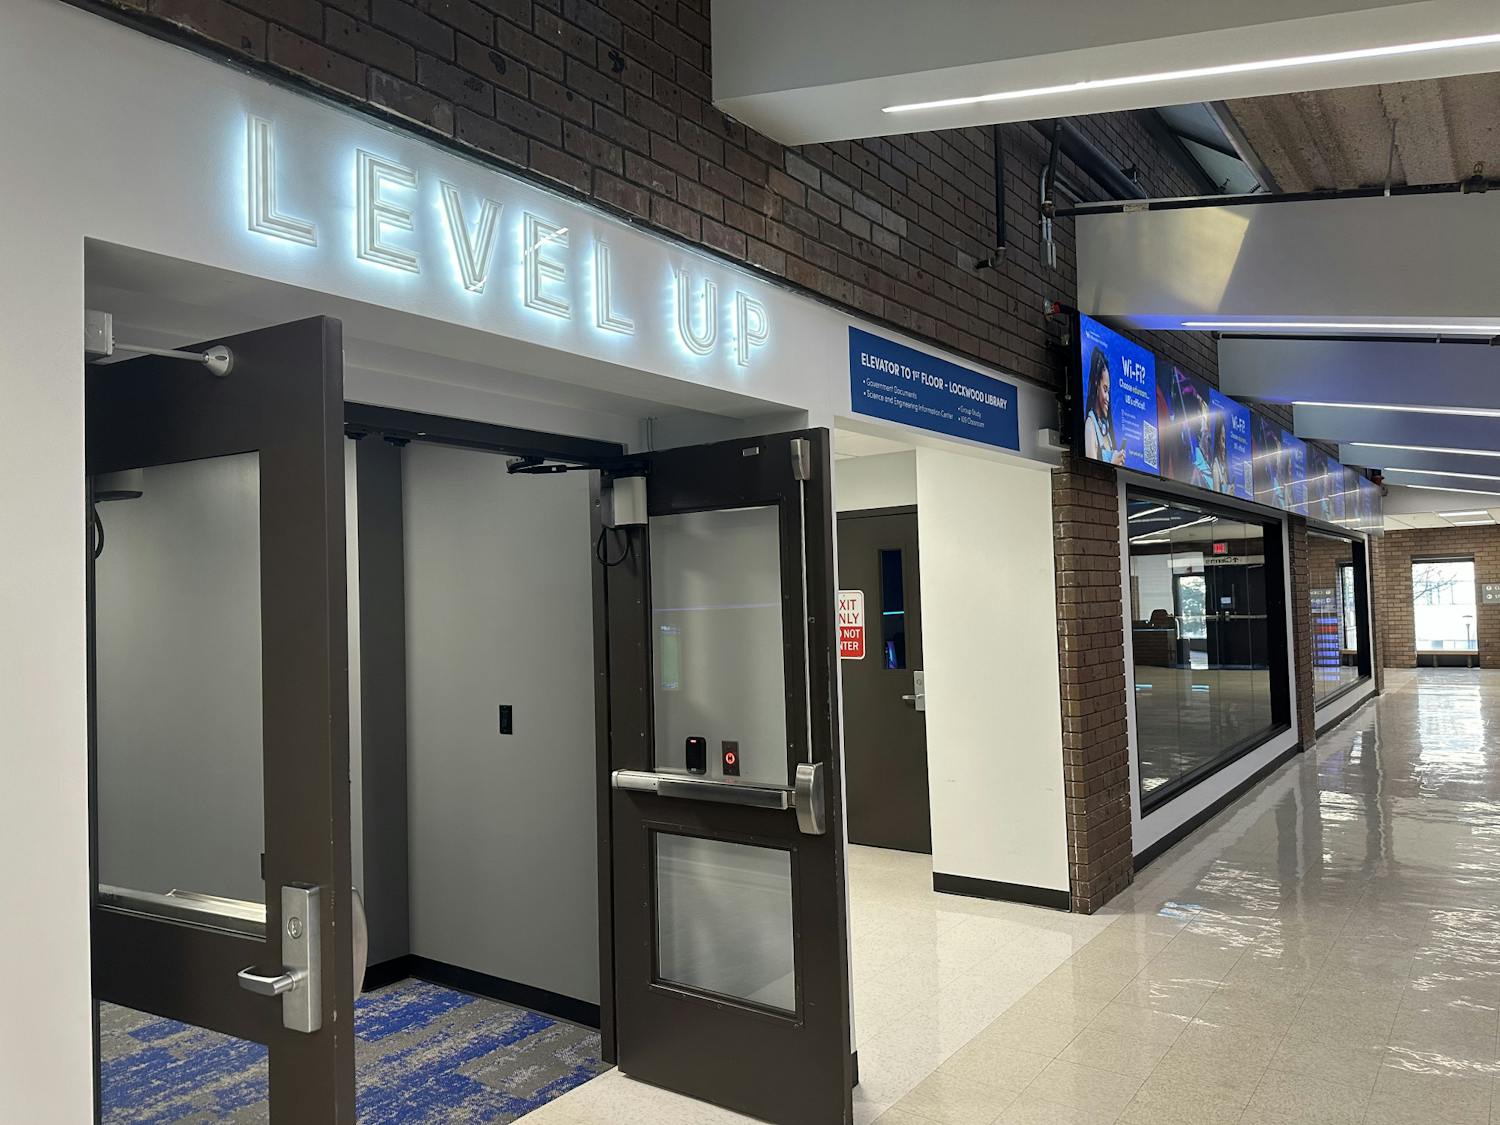 Level Up gaming lounge outside of Lockwood Library.